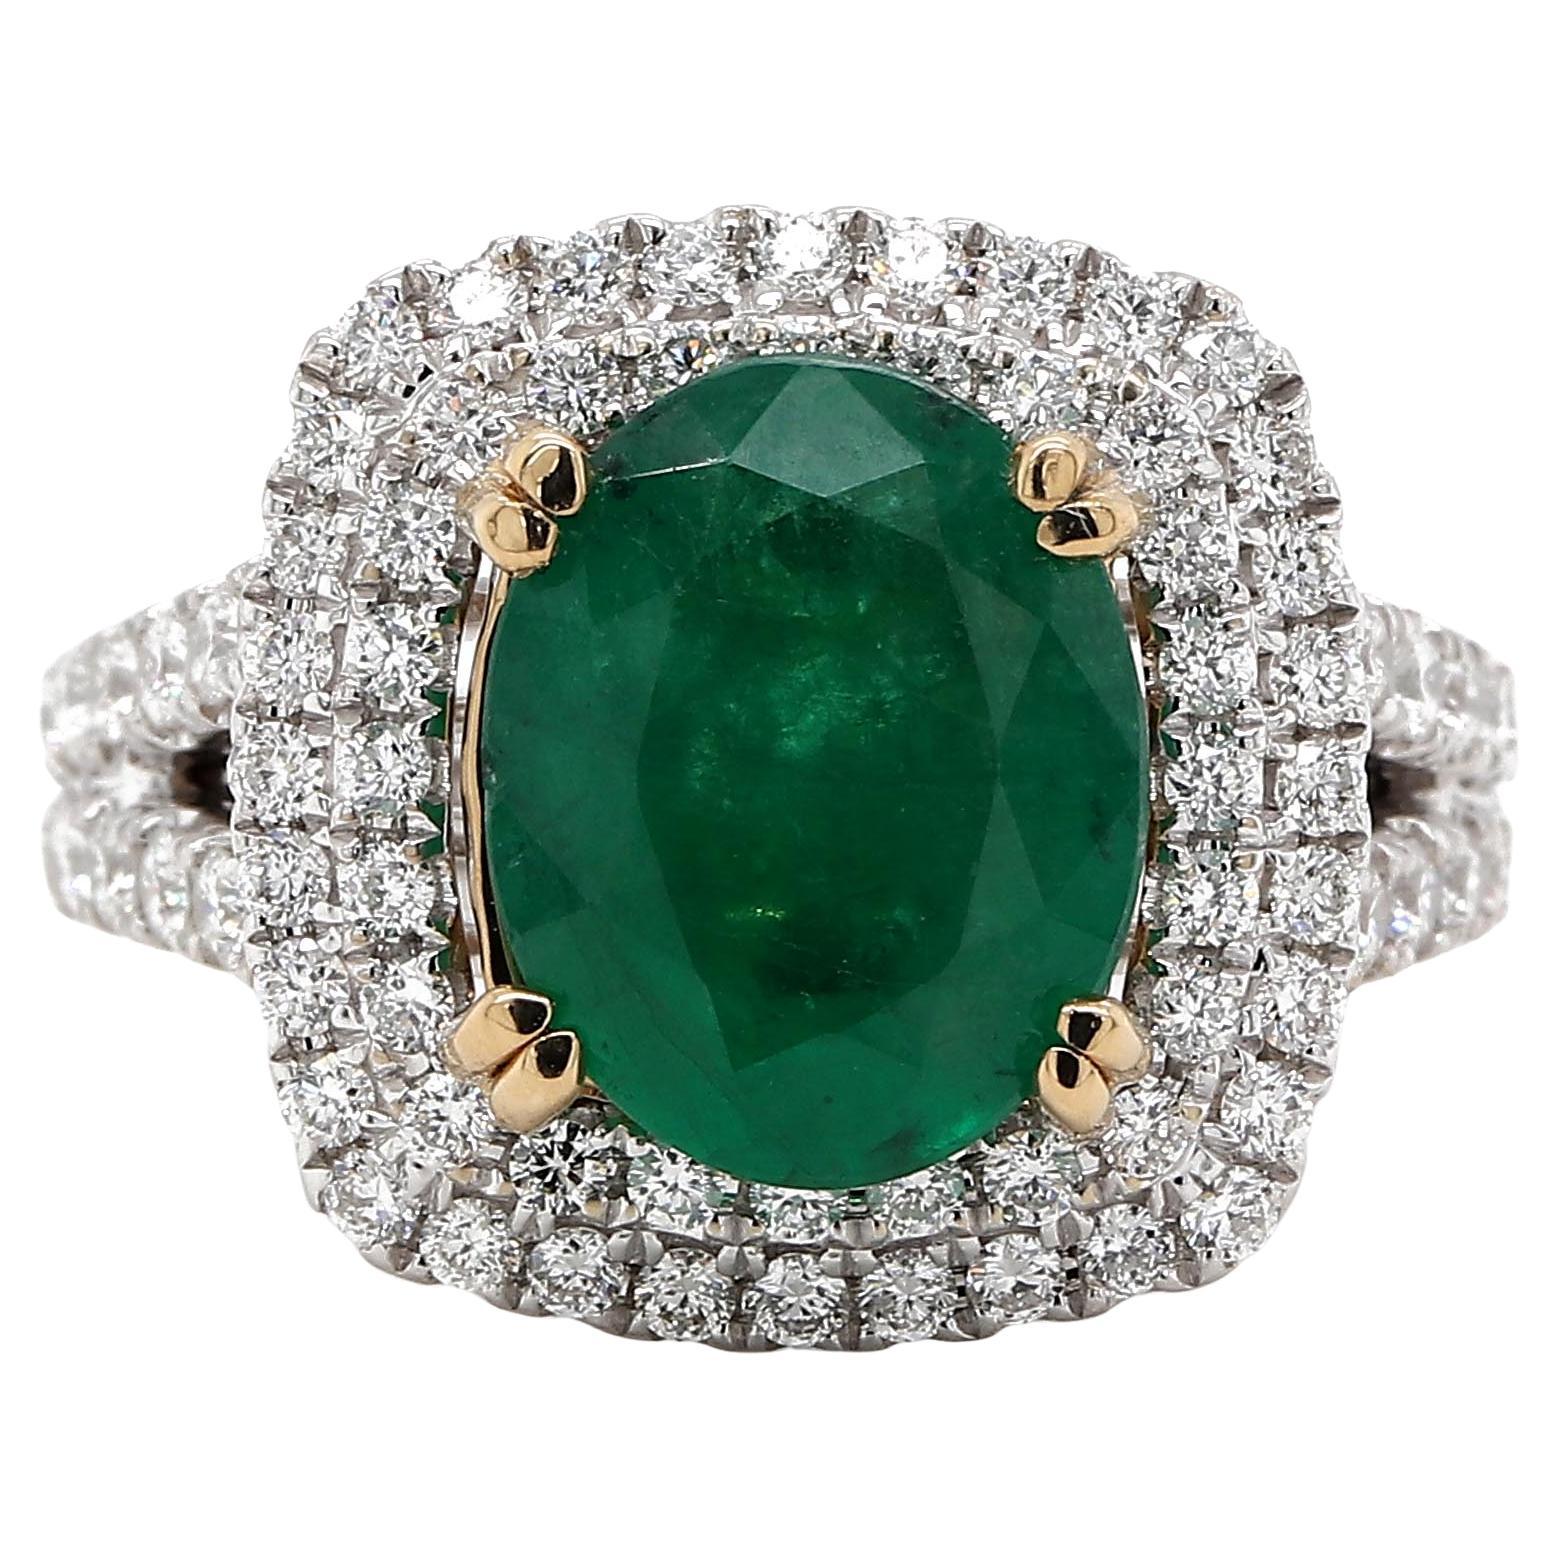 Fine 1.06 Carat Emerald Ring in 18k 2 Tone Gold For Sale